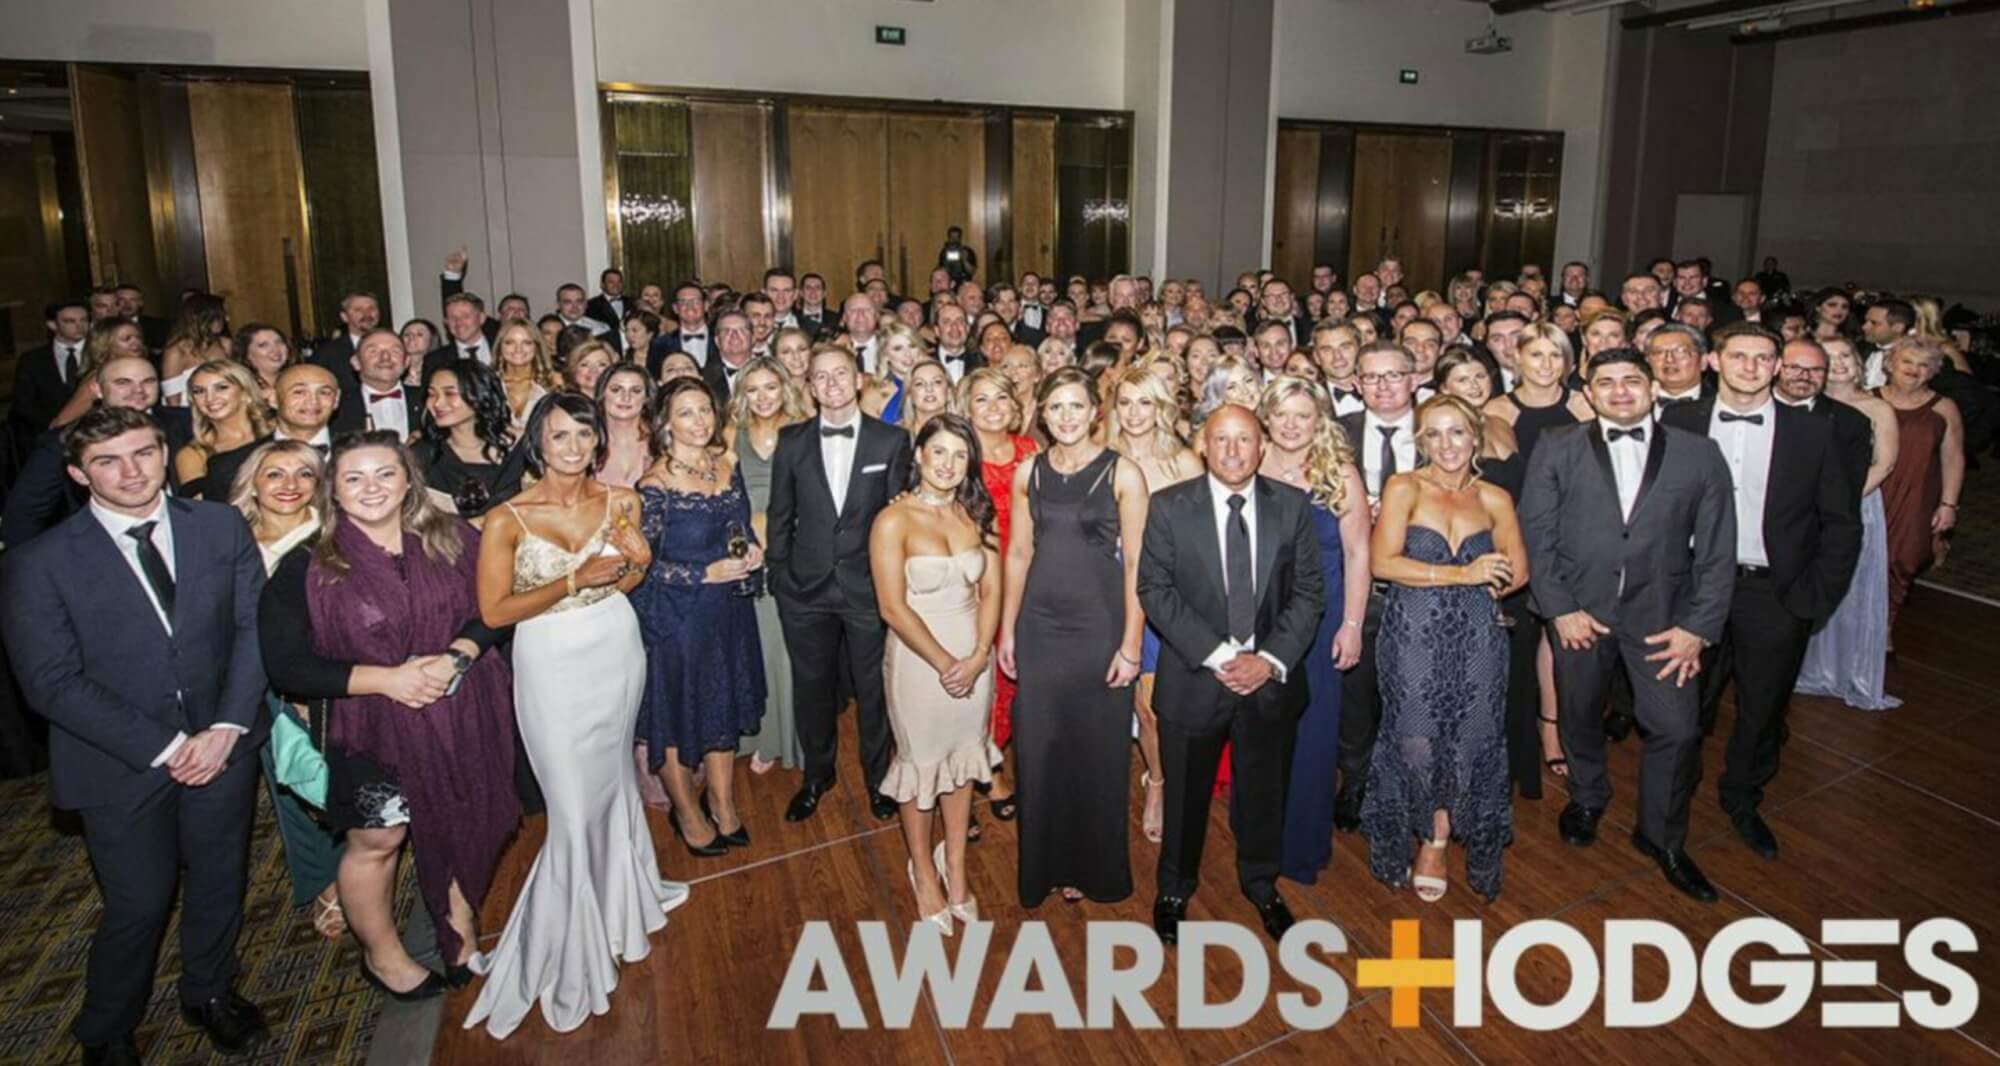 The 2017 Hodges Annual Awards Night!